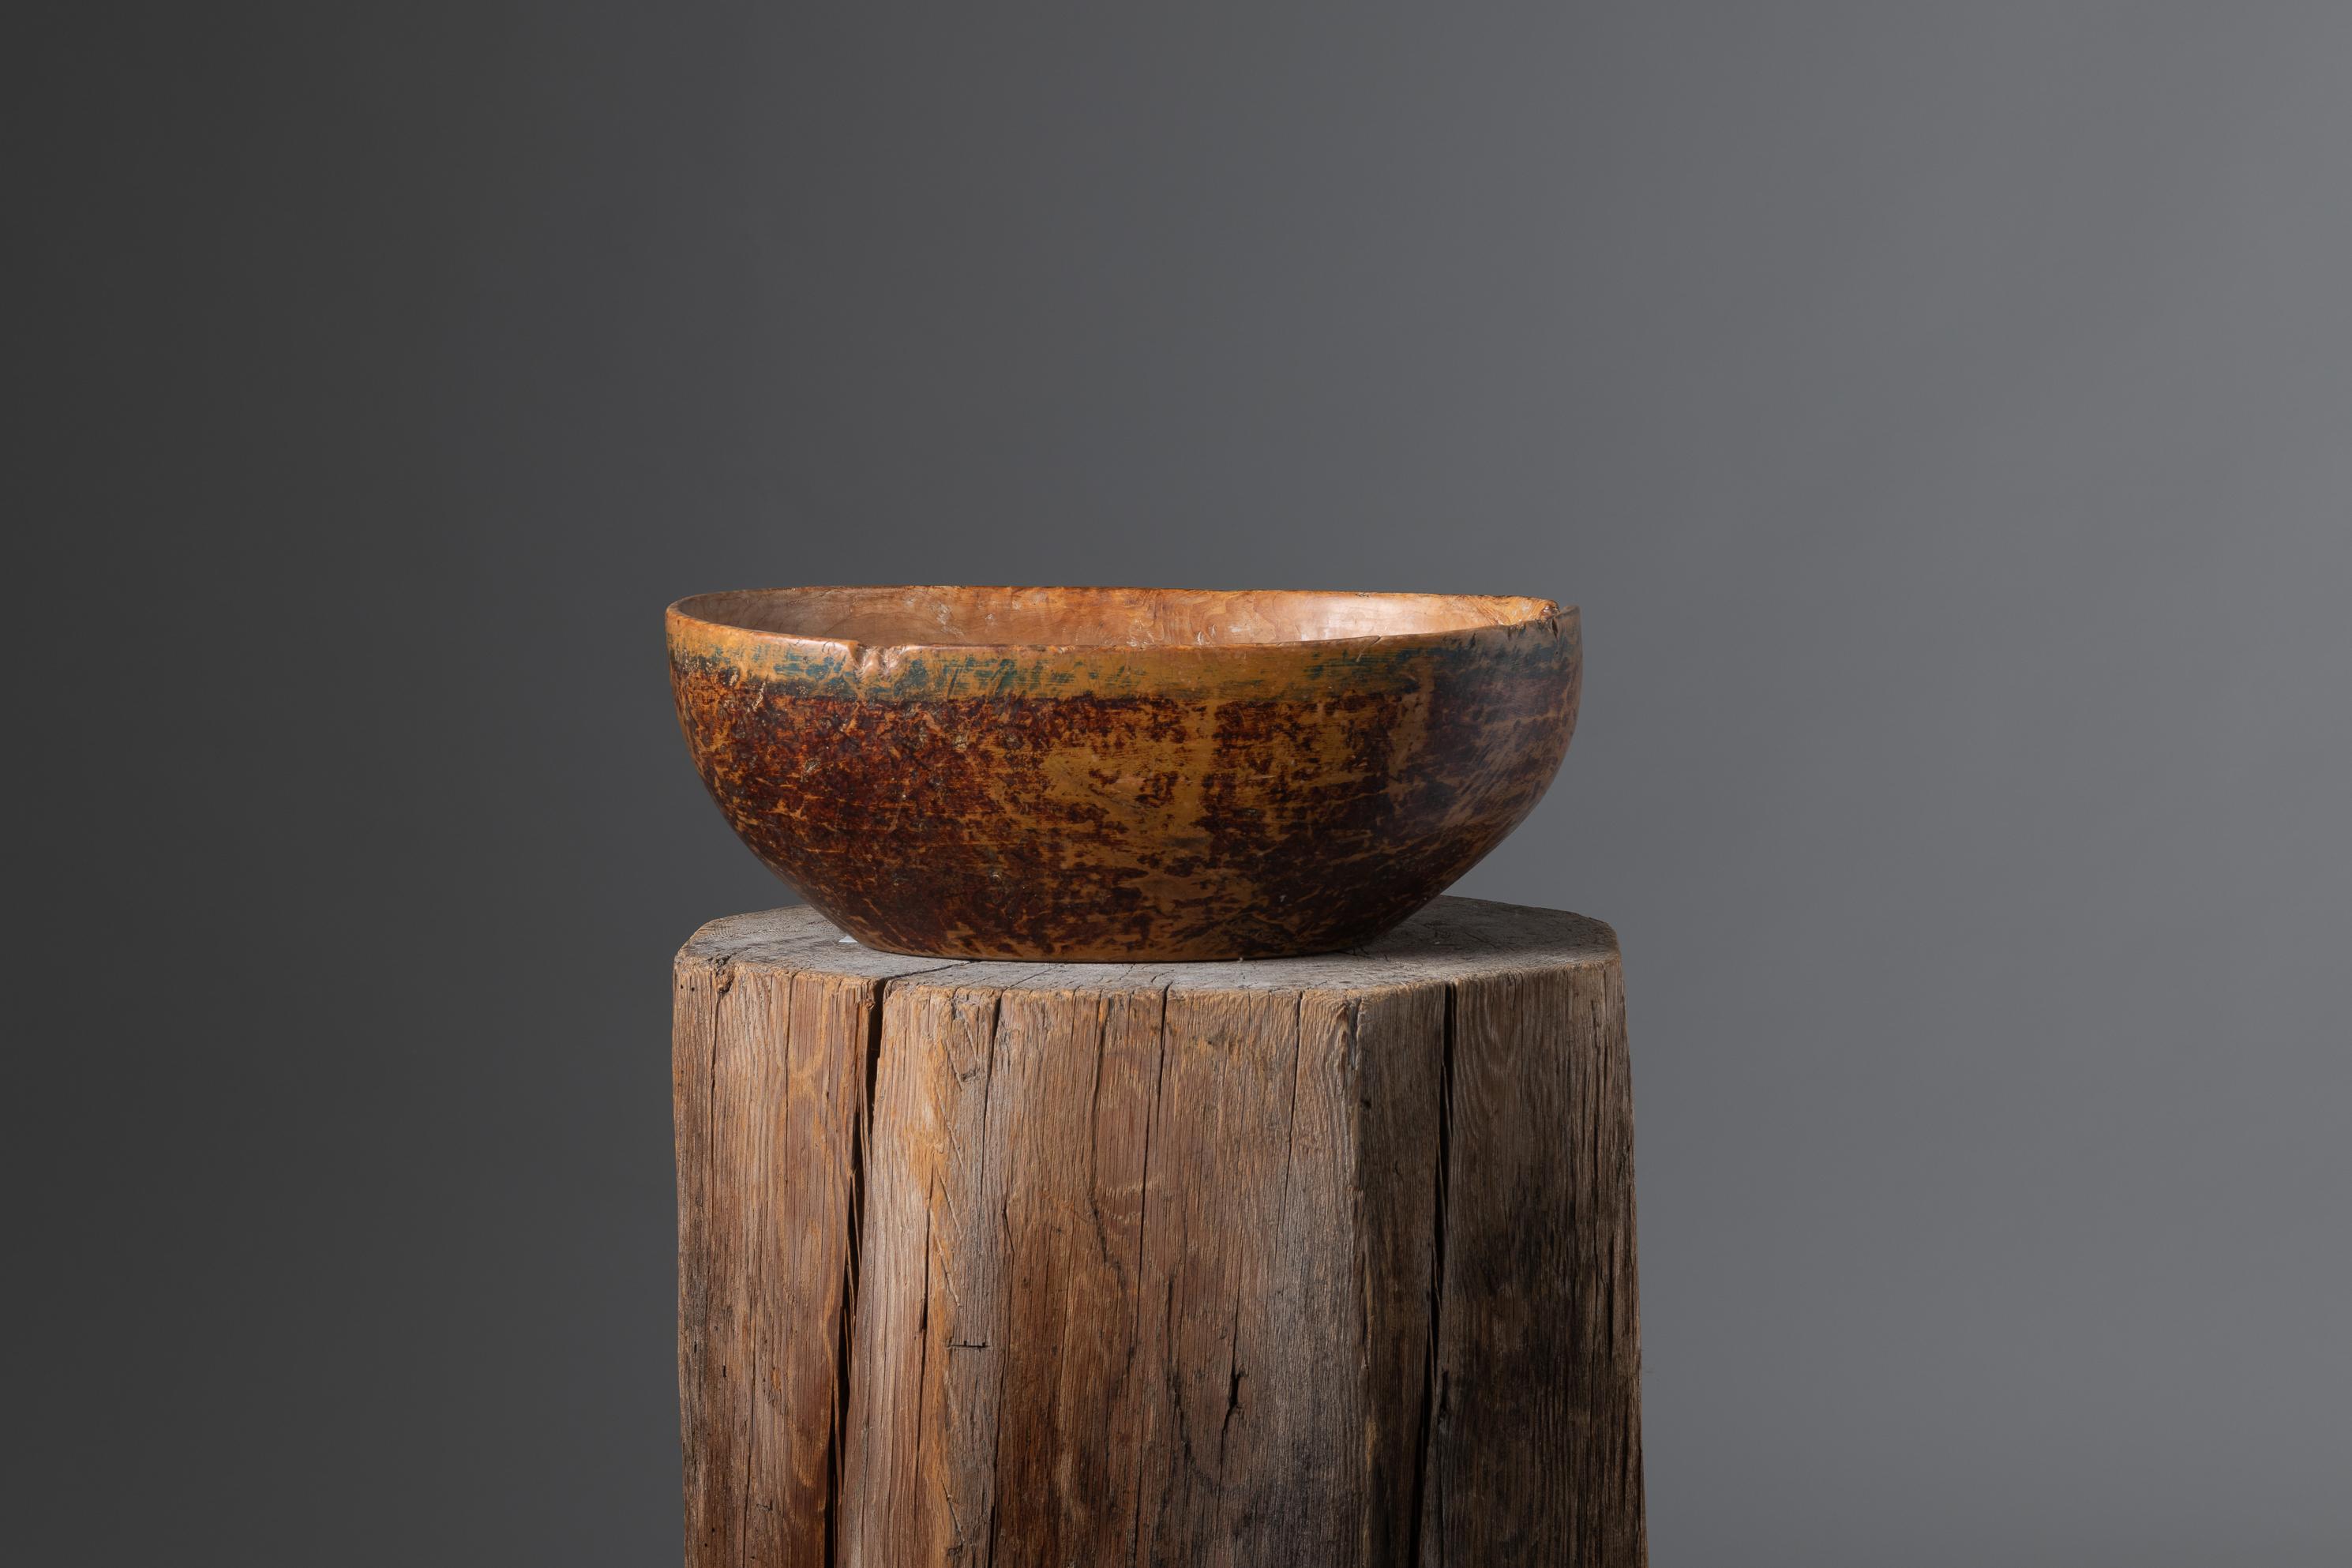 Northern Swedish mid-19th century wood bowl. The bowl has an organic or oval shape and unusually high sides which makes it unusually deep. It has some marks of use on the outside but the bowl still has the original faux paint. Bowls like these were